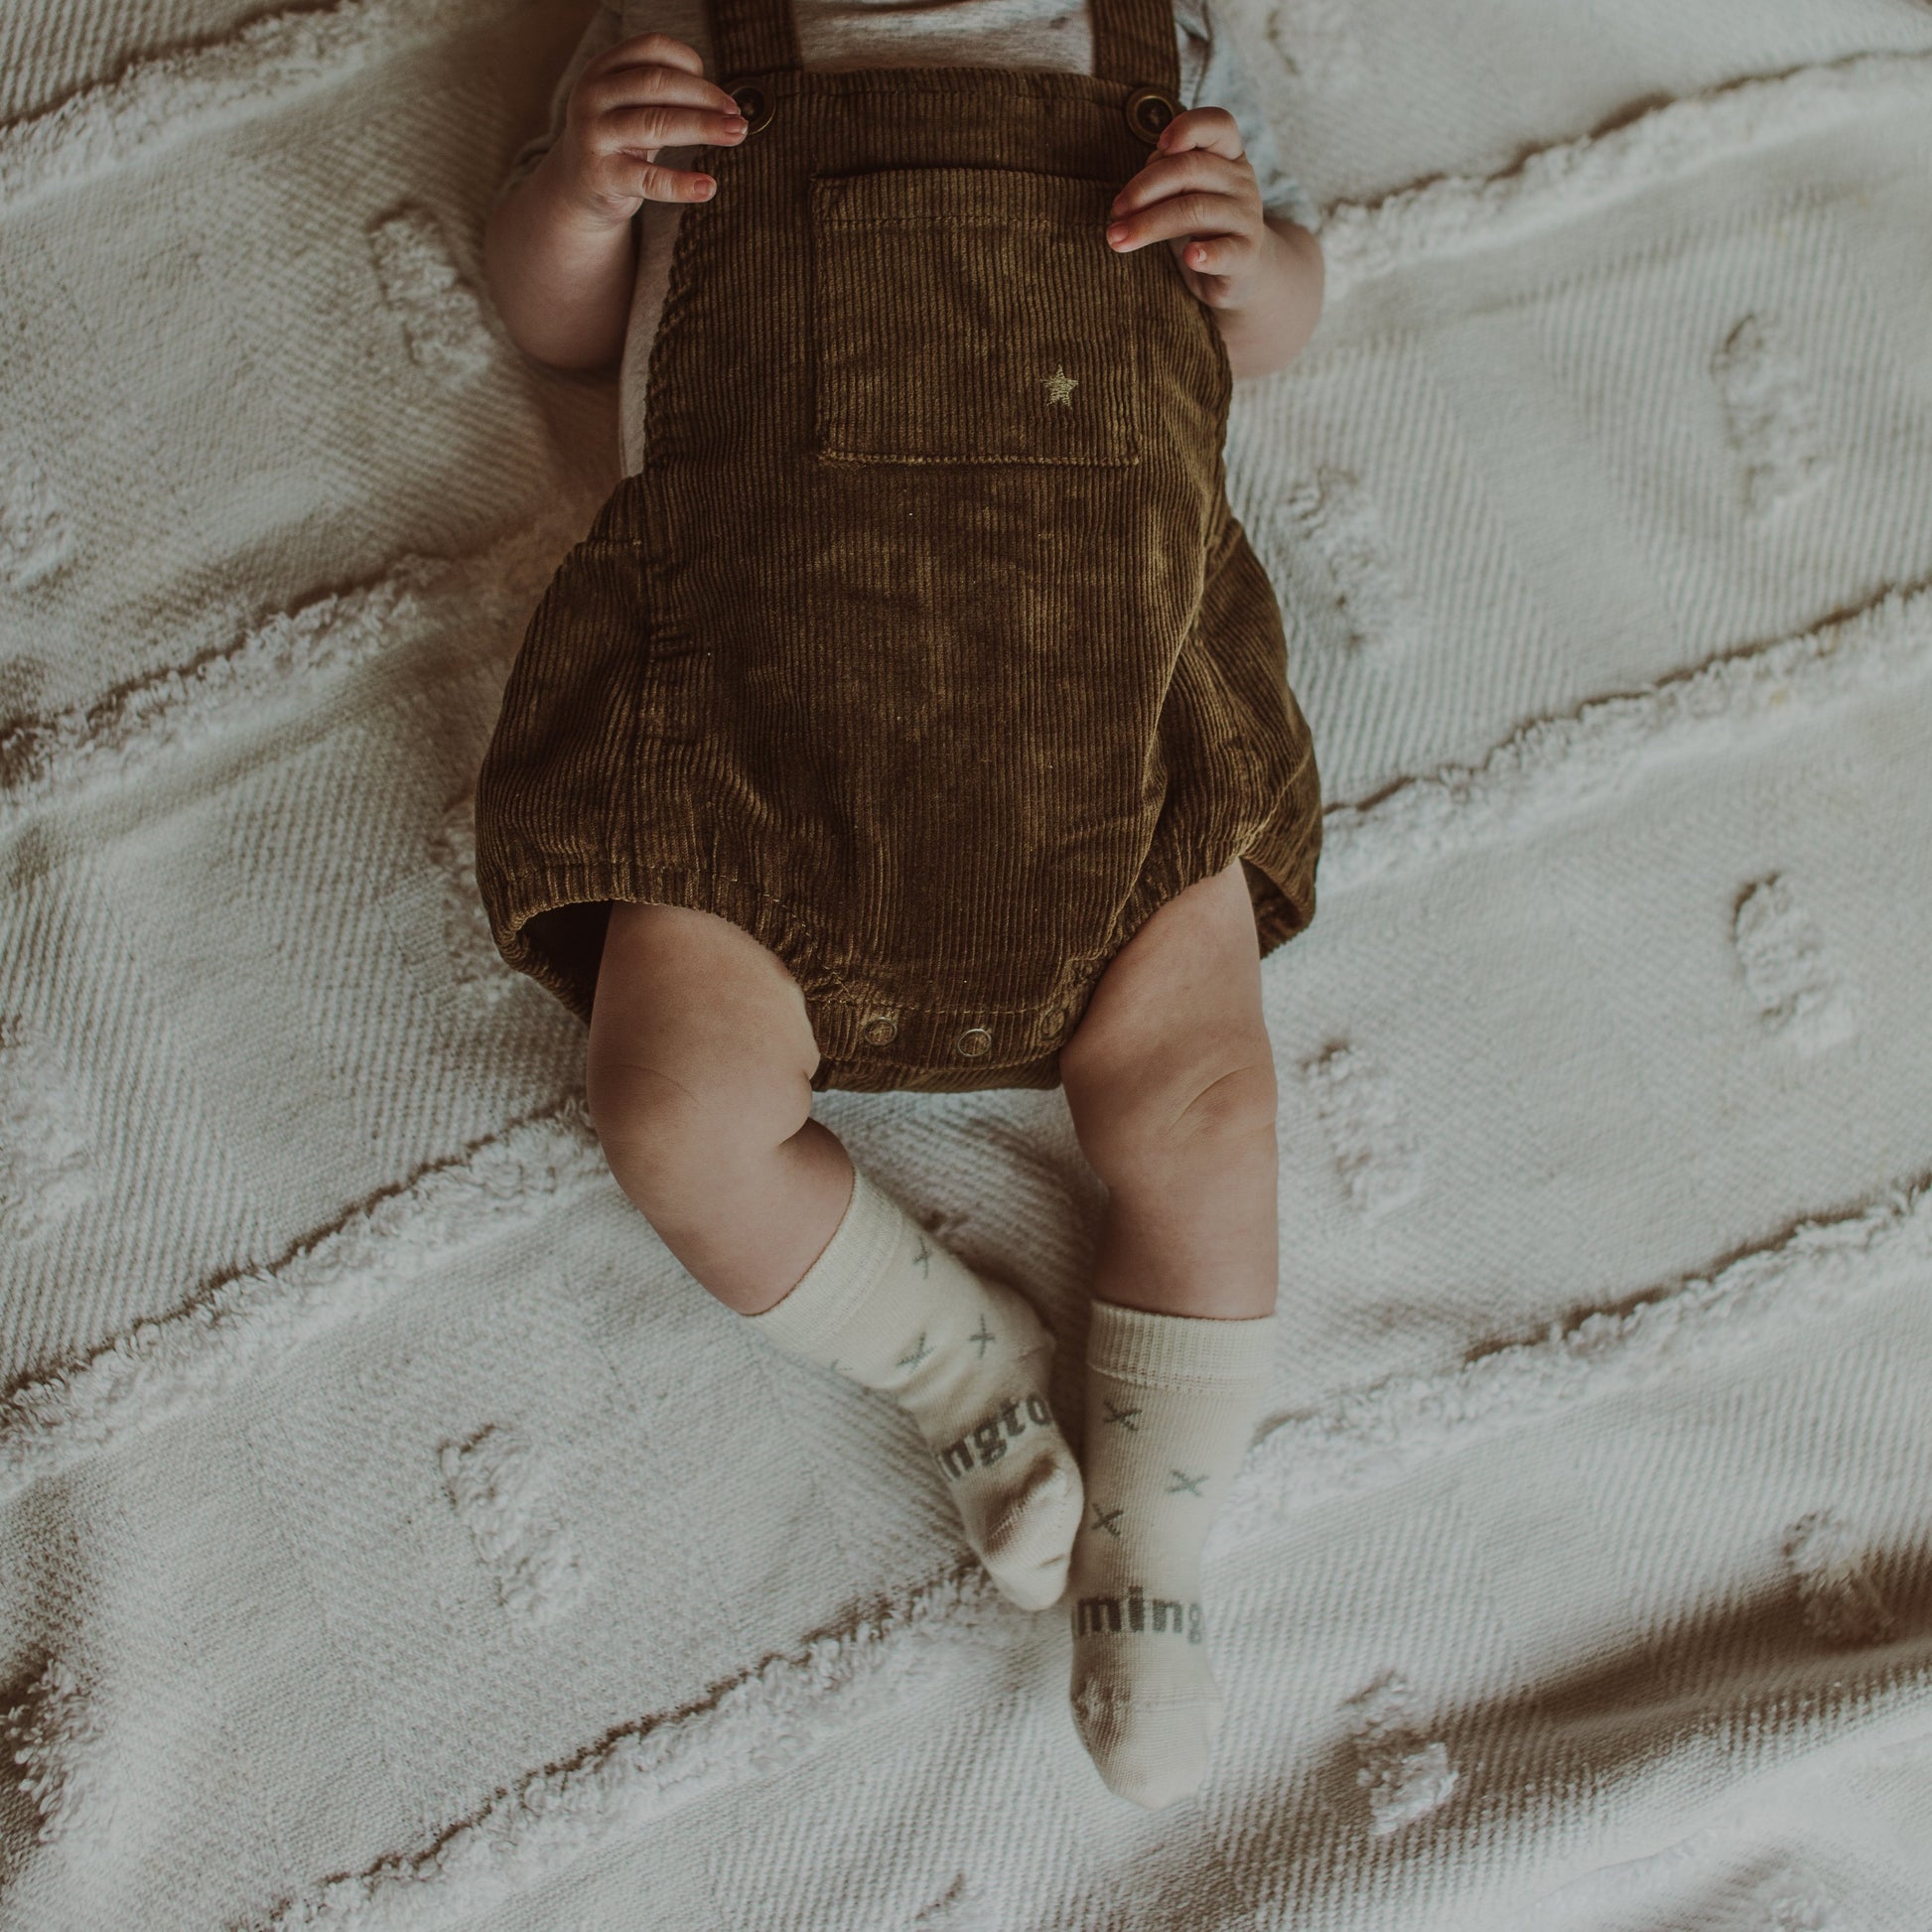 Baby wearing a brown corduroy romper and cream merino socks with grey X print.